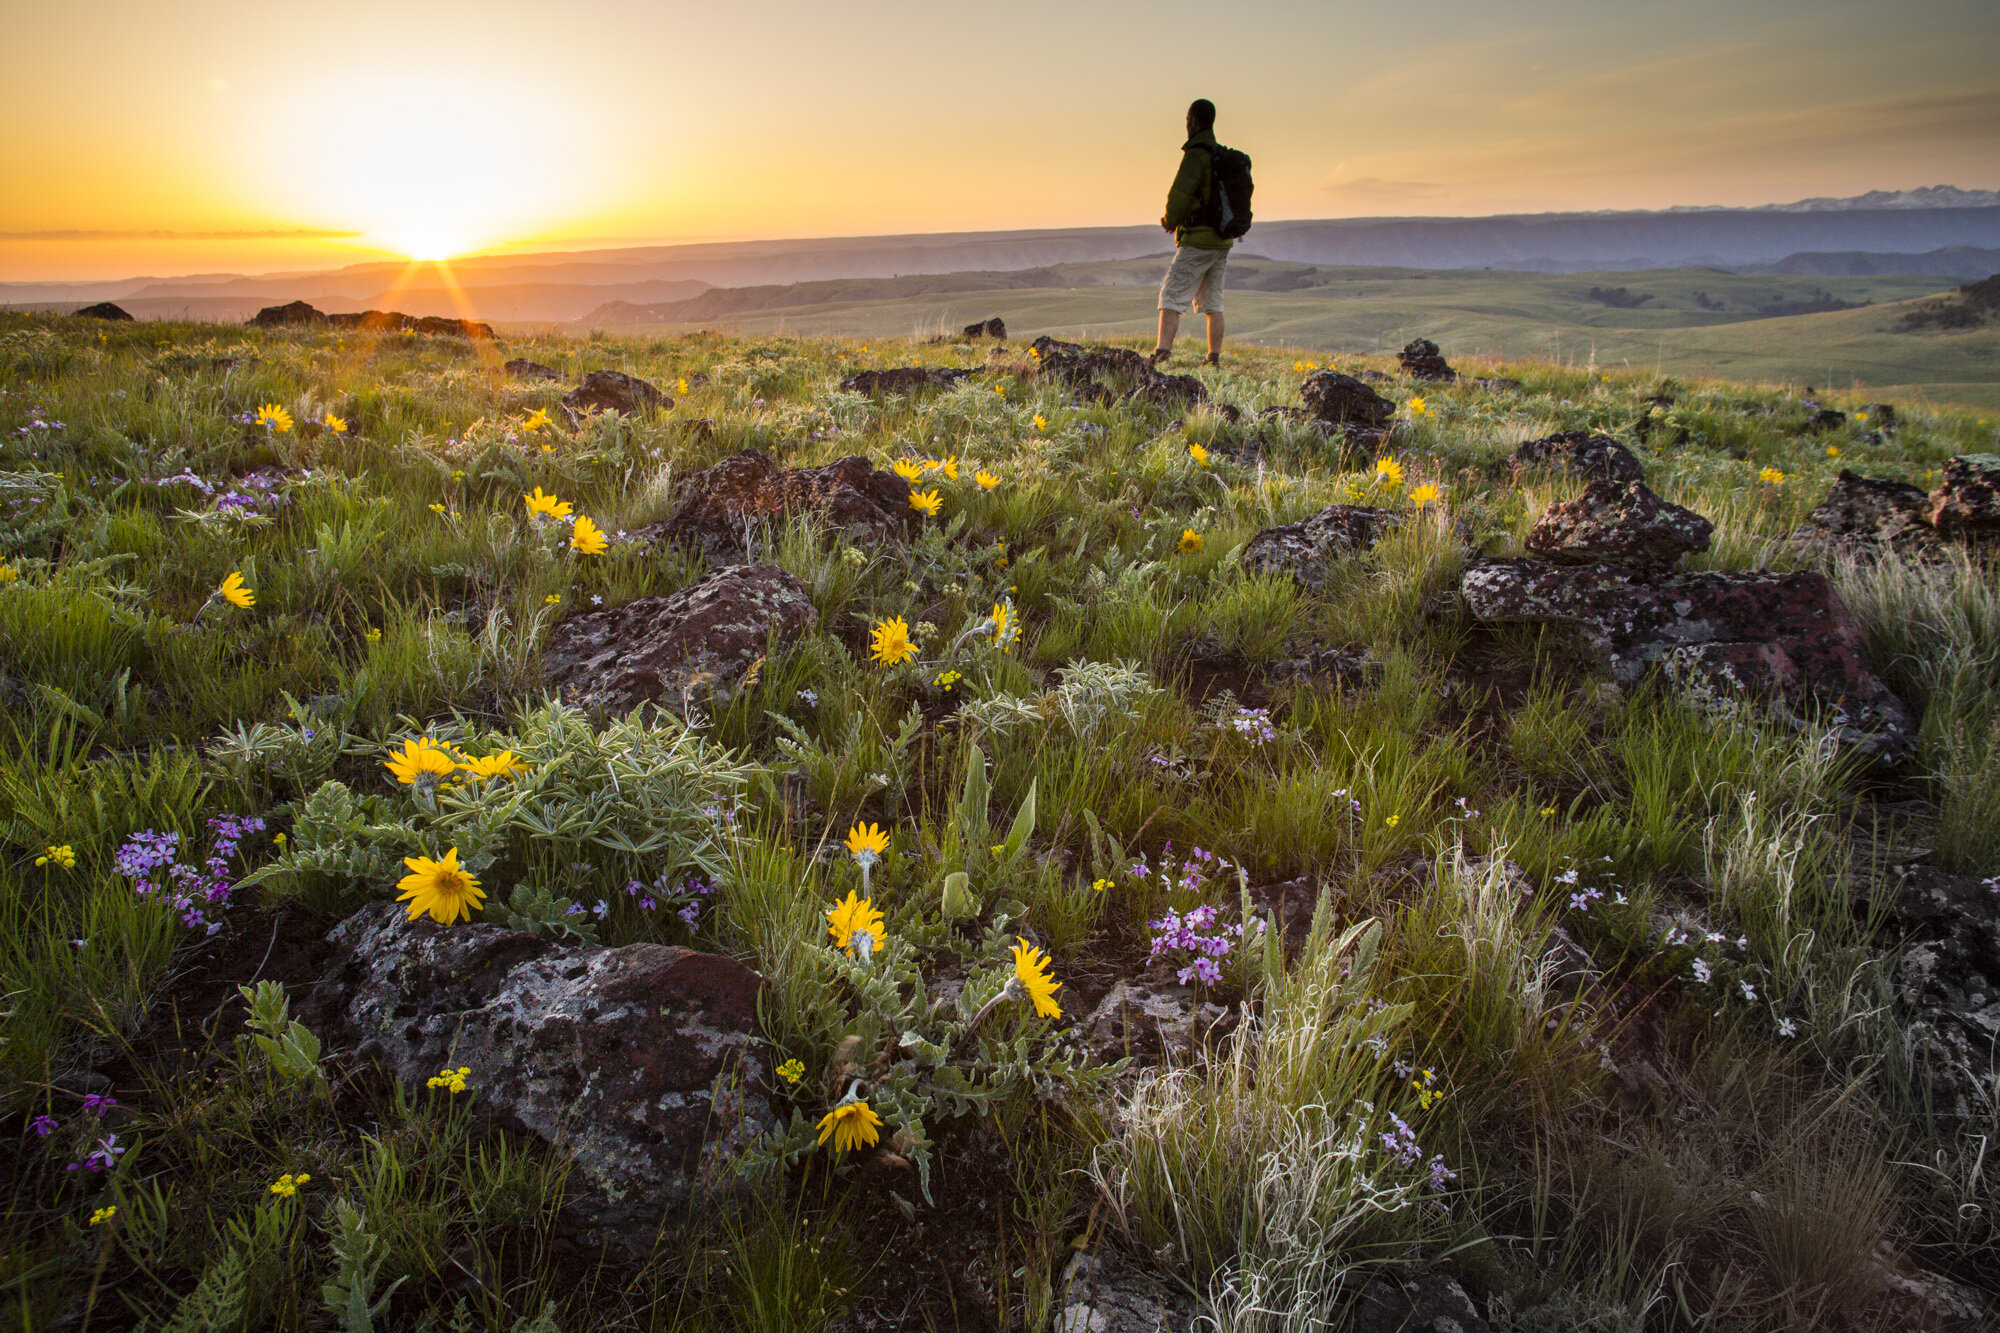  Sunrise on the Zumwalt Prairie, OR7’s stomping grounds when he was born and close to the start of our expedition. 